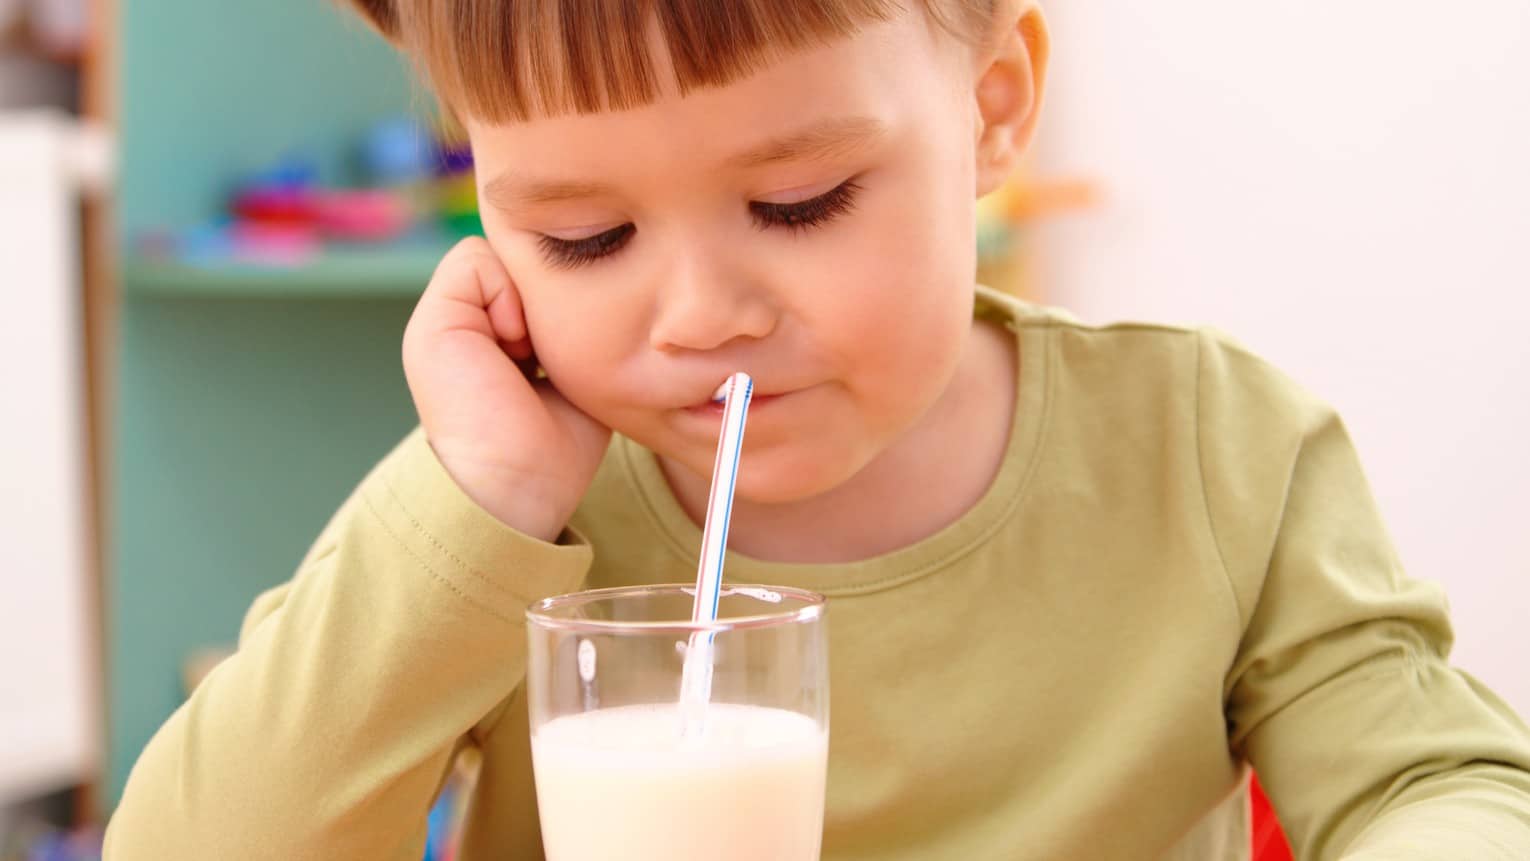 a small girl sits with her hand holding up the side of her face as she looks down in a downcast manner as she drinks a glass of milk through a straw.